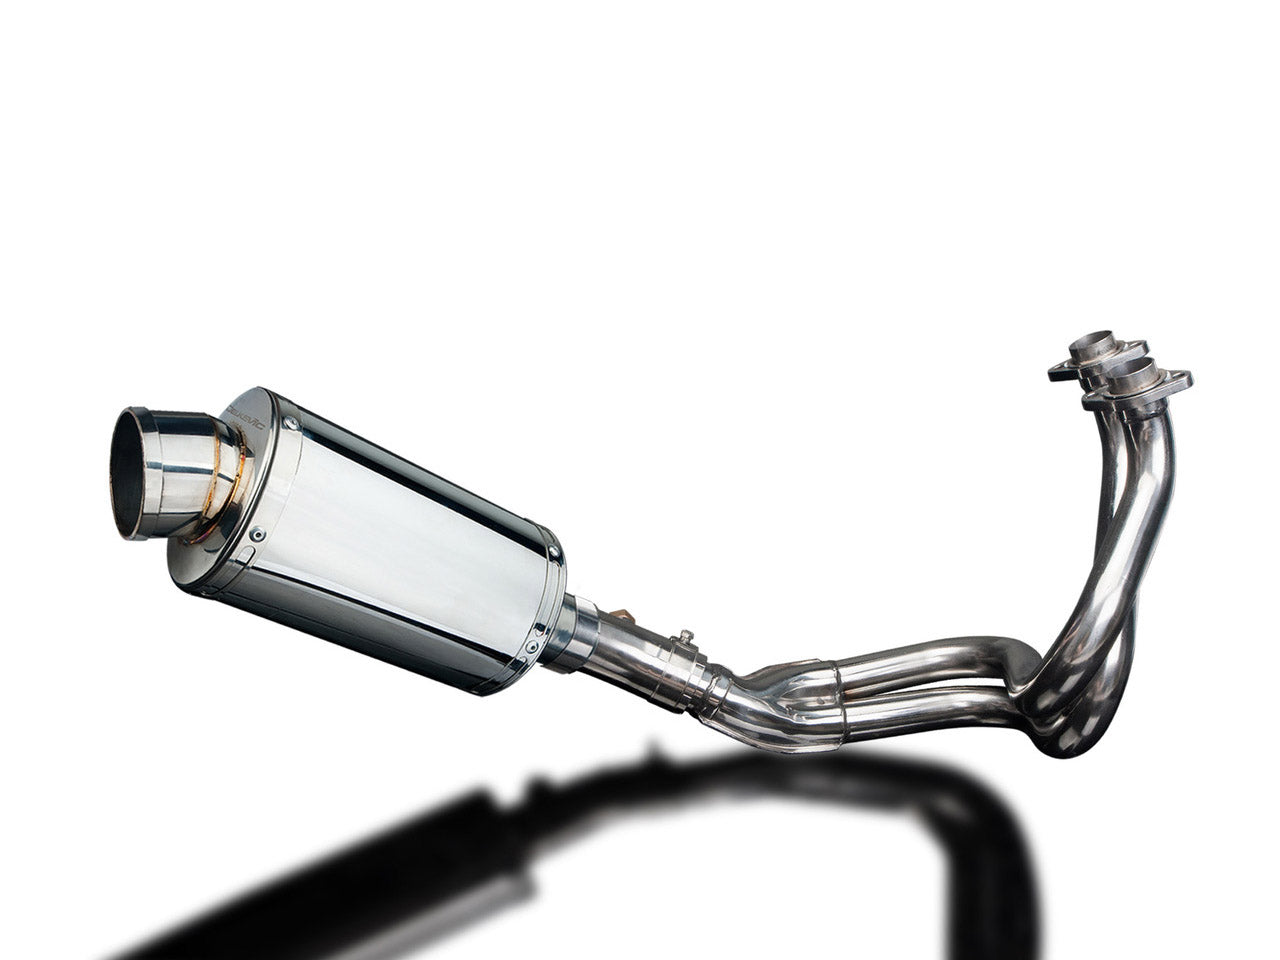 DELKEVIC Kawasaki Versys 650 (07/14) Full Exhaust System with SS70 9" Silencer